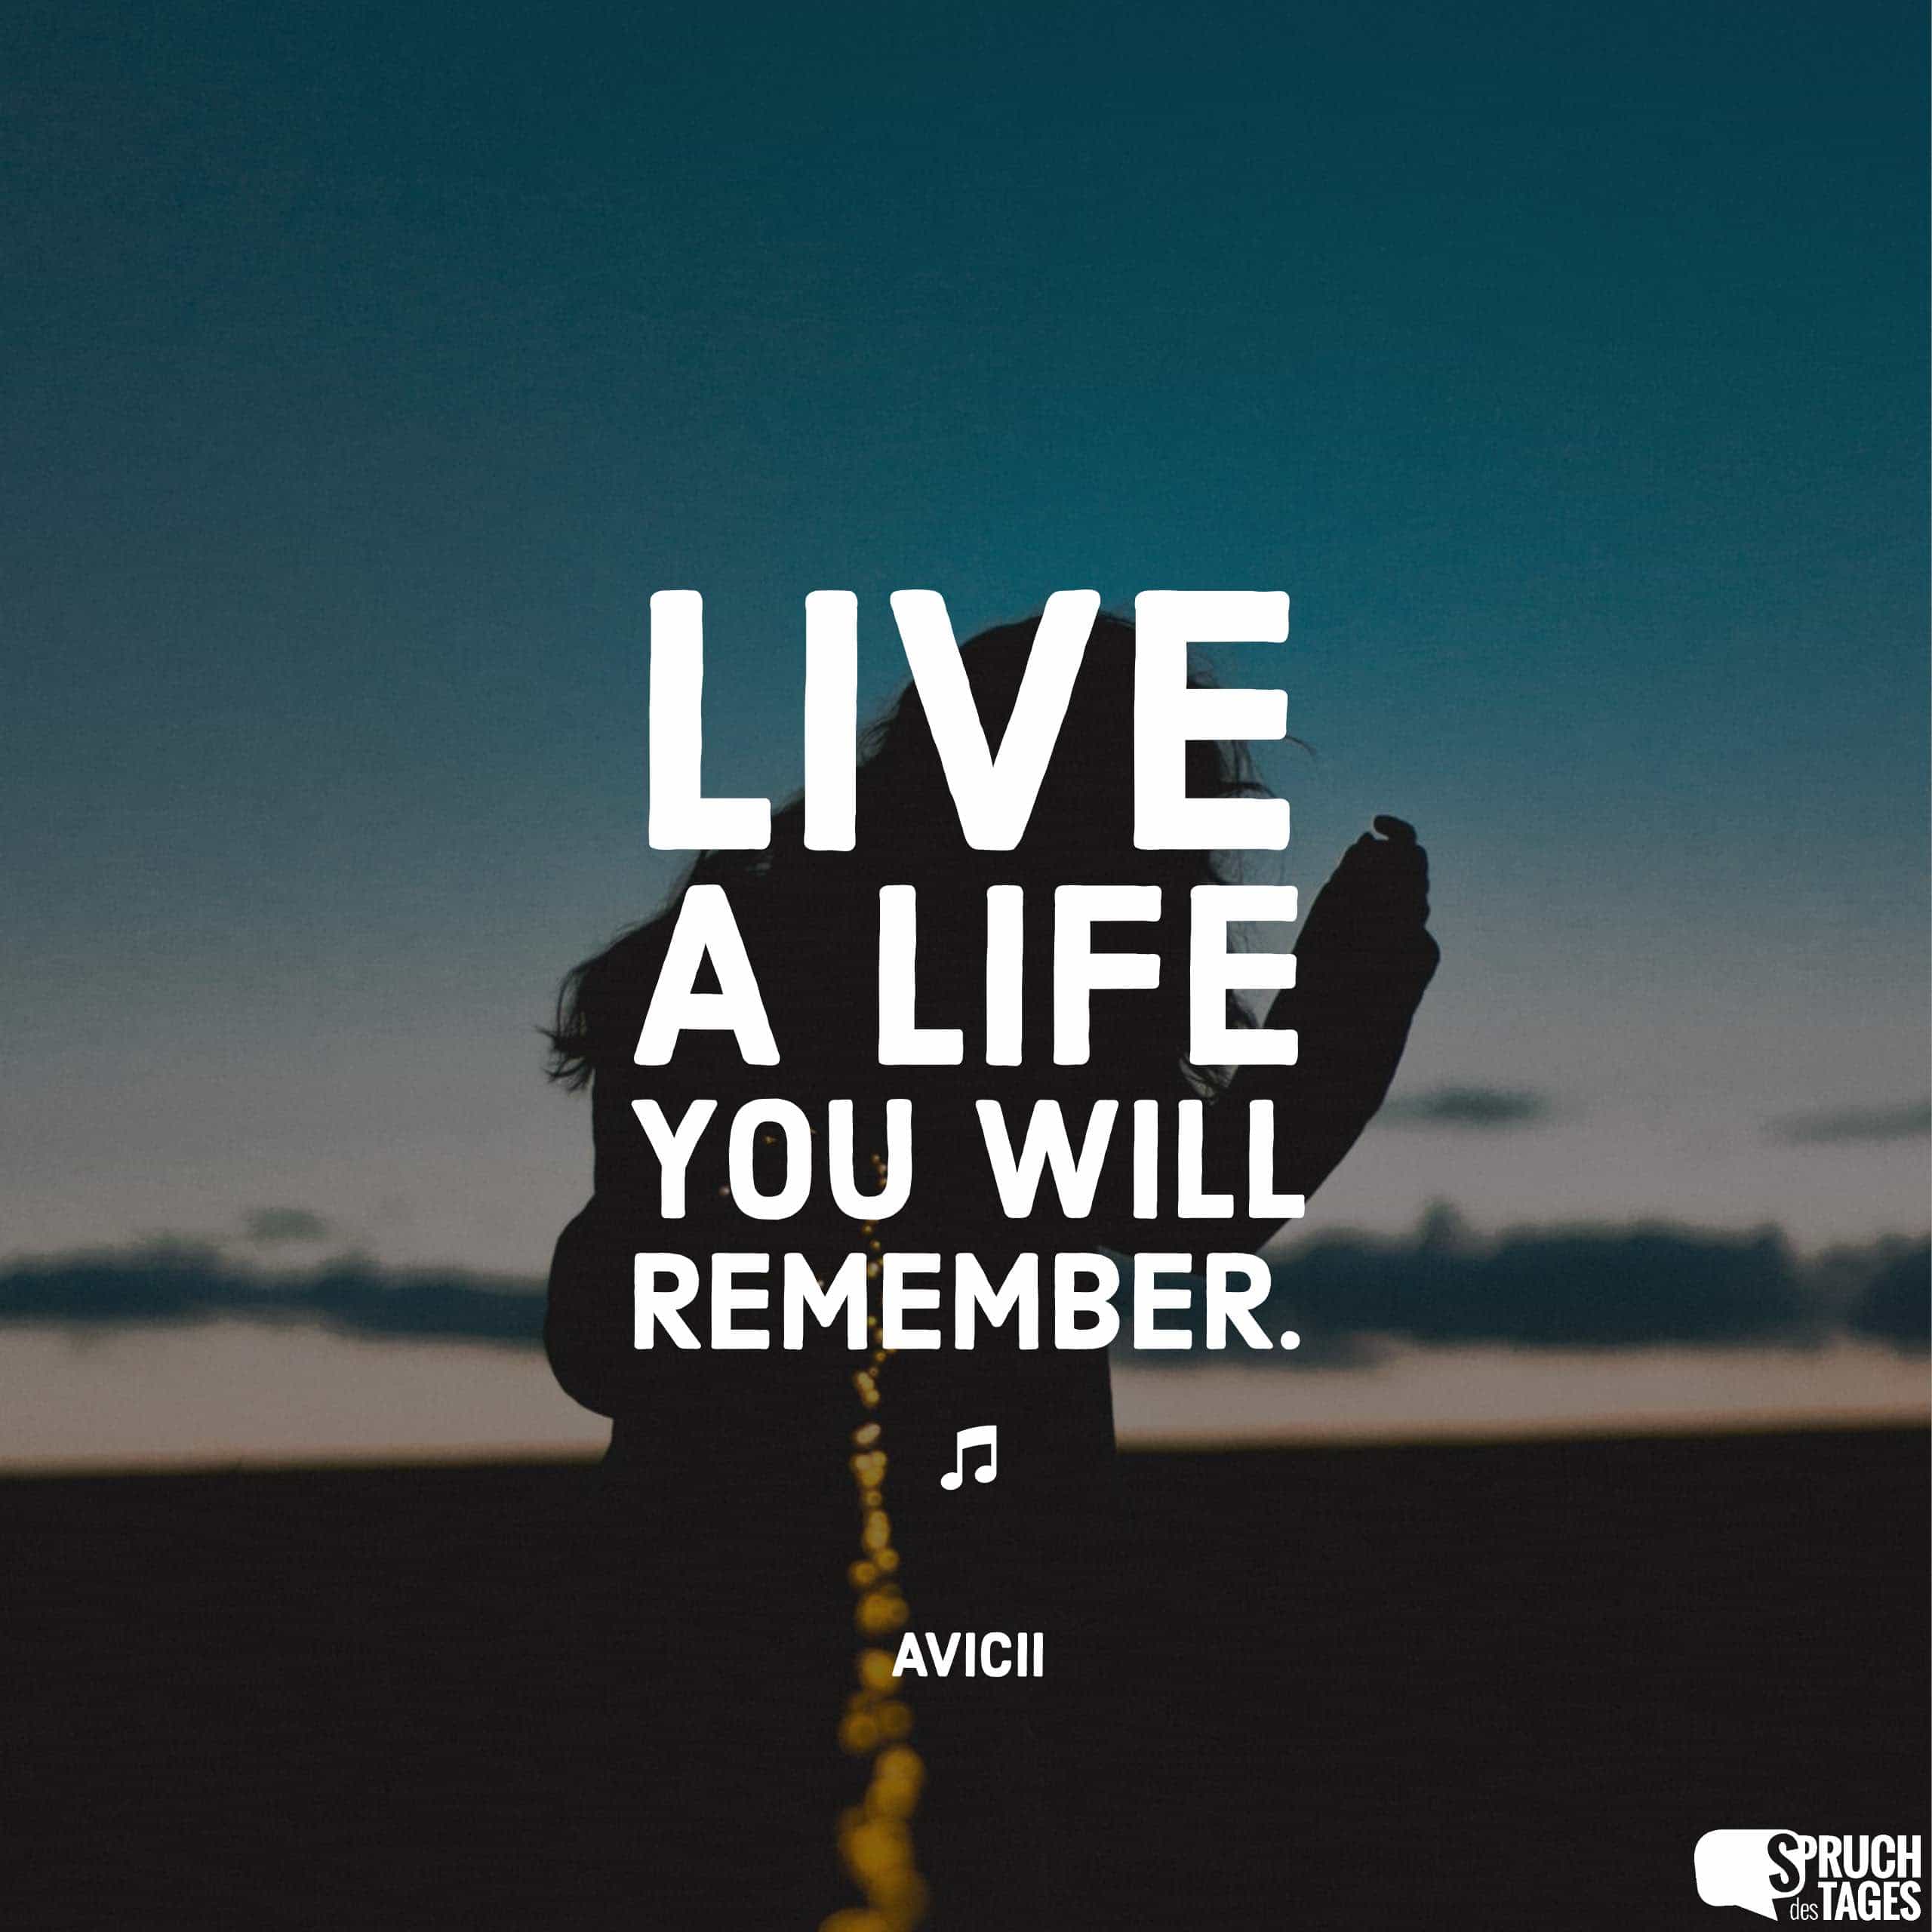 Live a life you will remember.